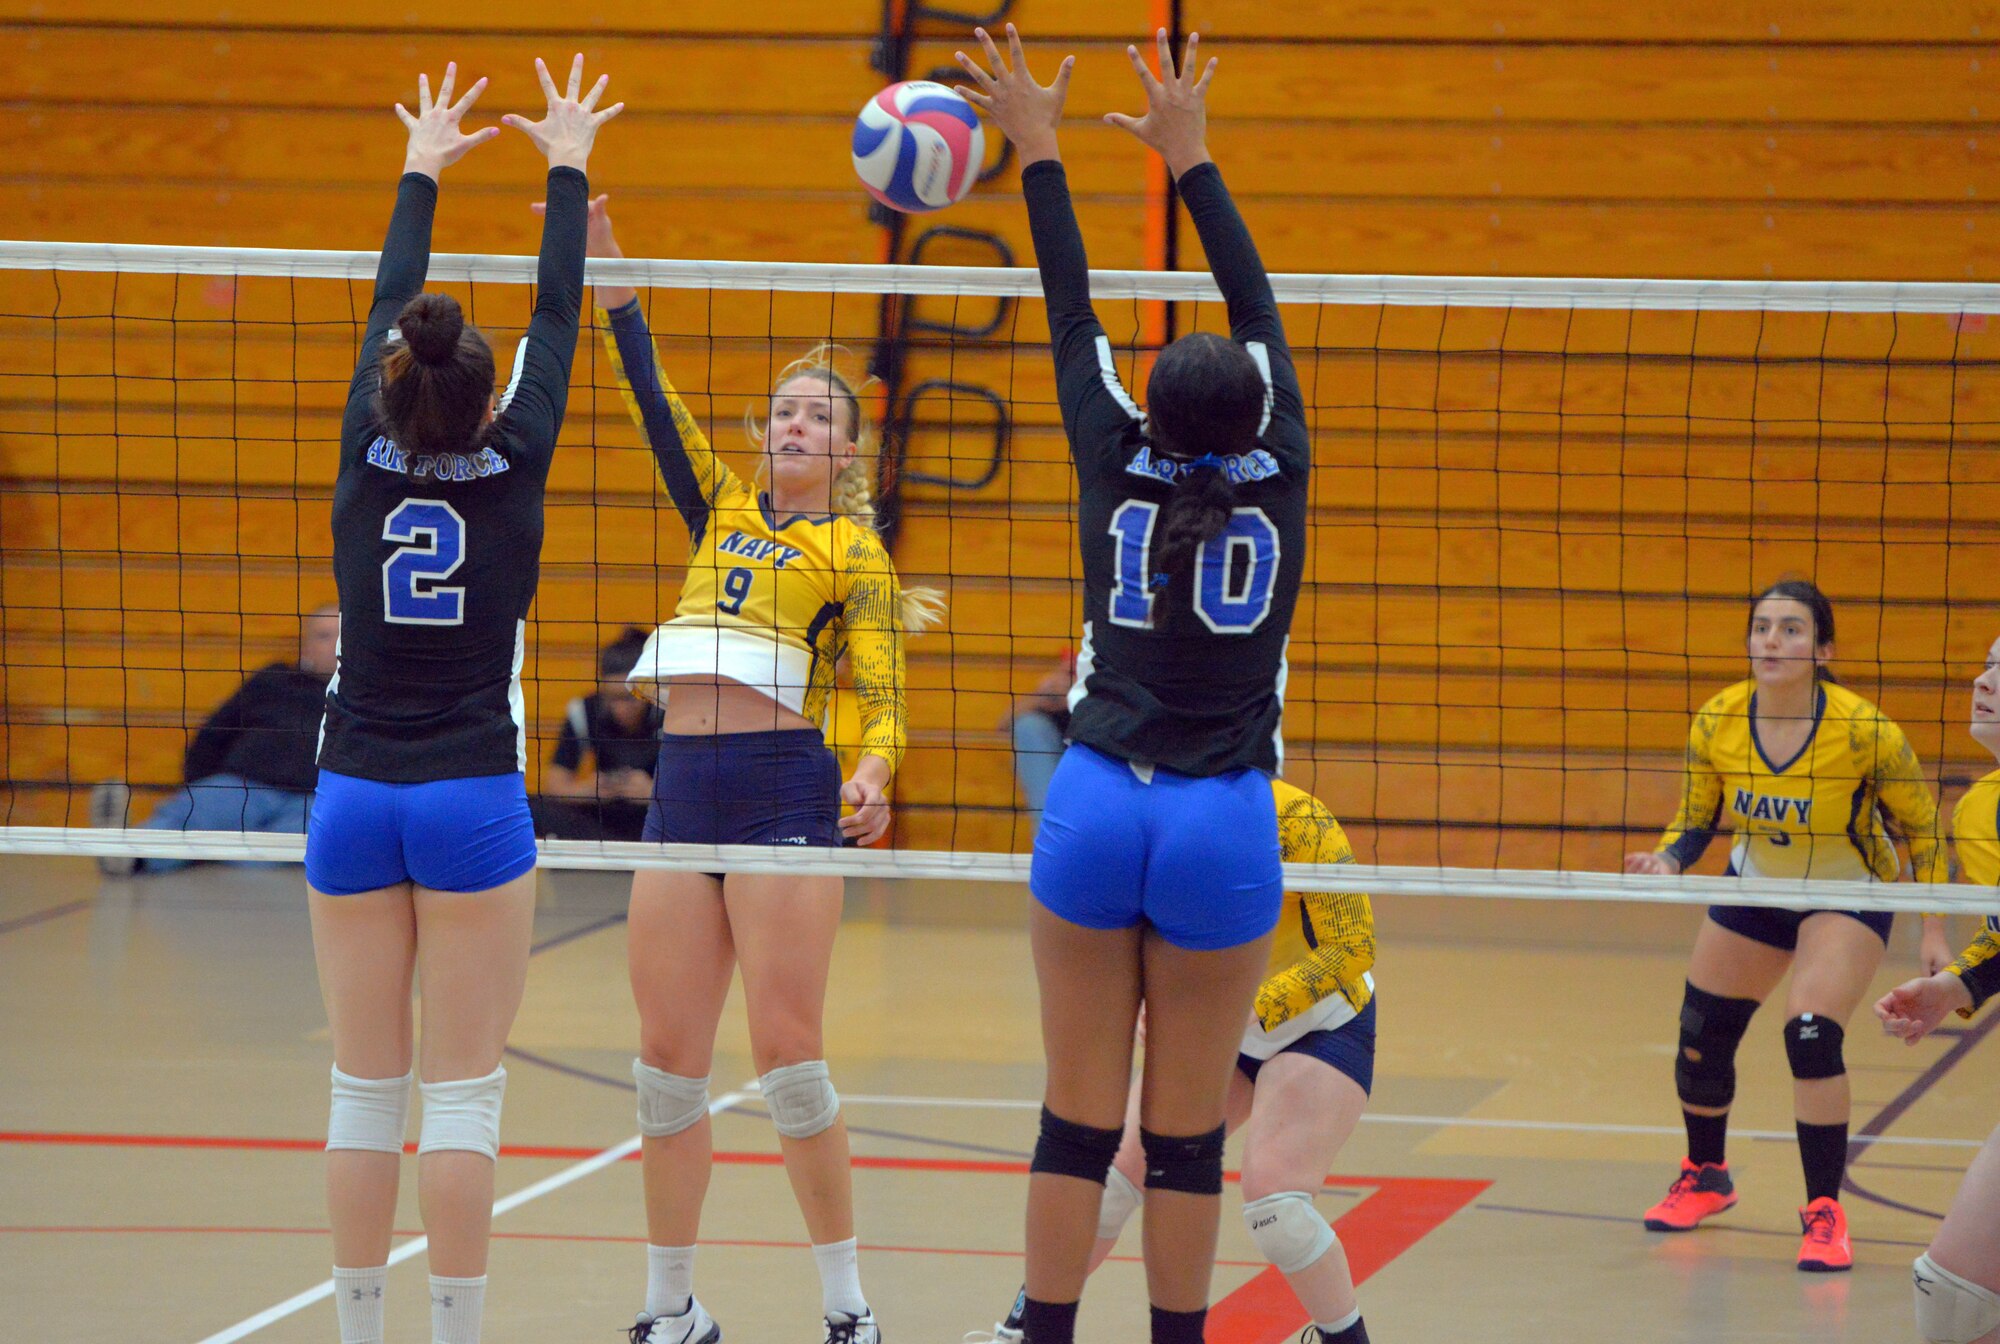 Senior Airman Jade Cairns (number 10), 60th Diagnostics and Therapeutics Squadron medical laboratory technician, jumps up for a block during the 2019 Armed Forces Volleyball Championship at Fort Bragg, North Carolina, Mar. 8, 2019. Army, Navy (with Coast Guard) and Air Force teams squared off at the annual AFVC through three days of round-robin competition, to eventually crown the best men and women volleyball players in the military. (U.S. Navy photo by Mass Communications Specialist 1st Class John Benson)